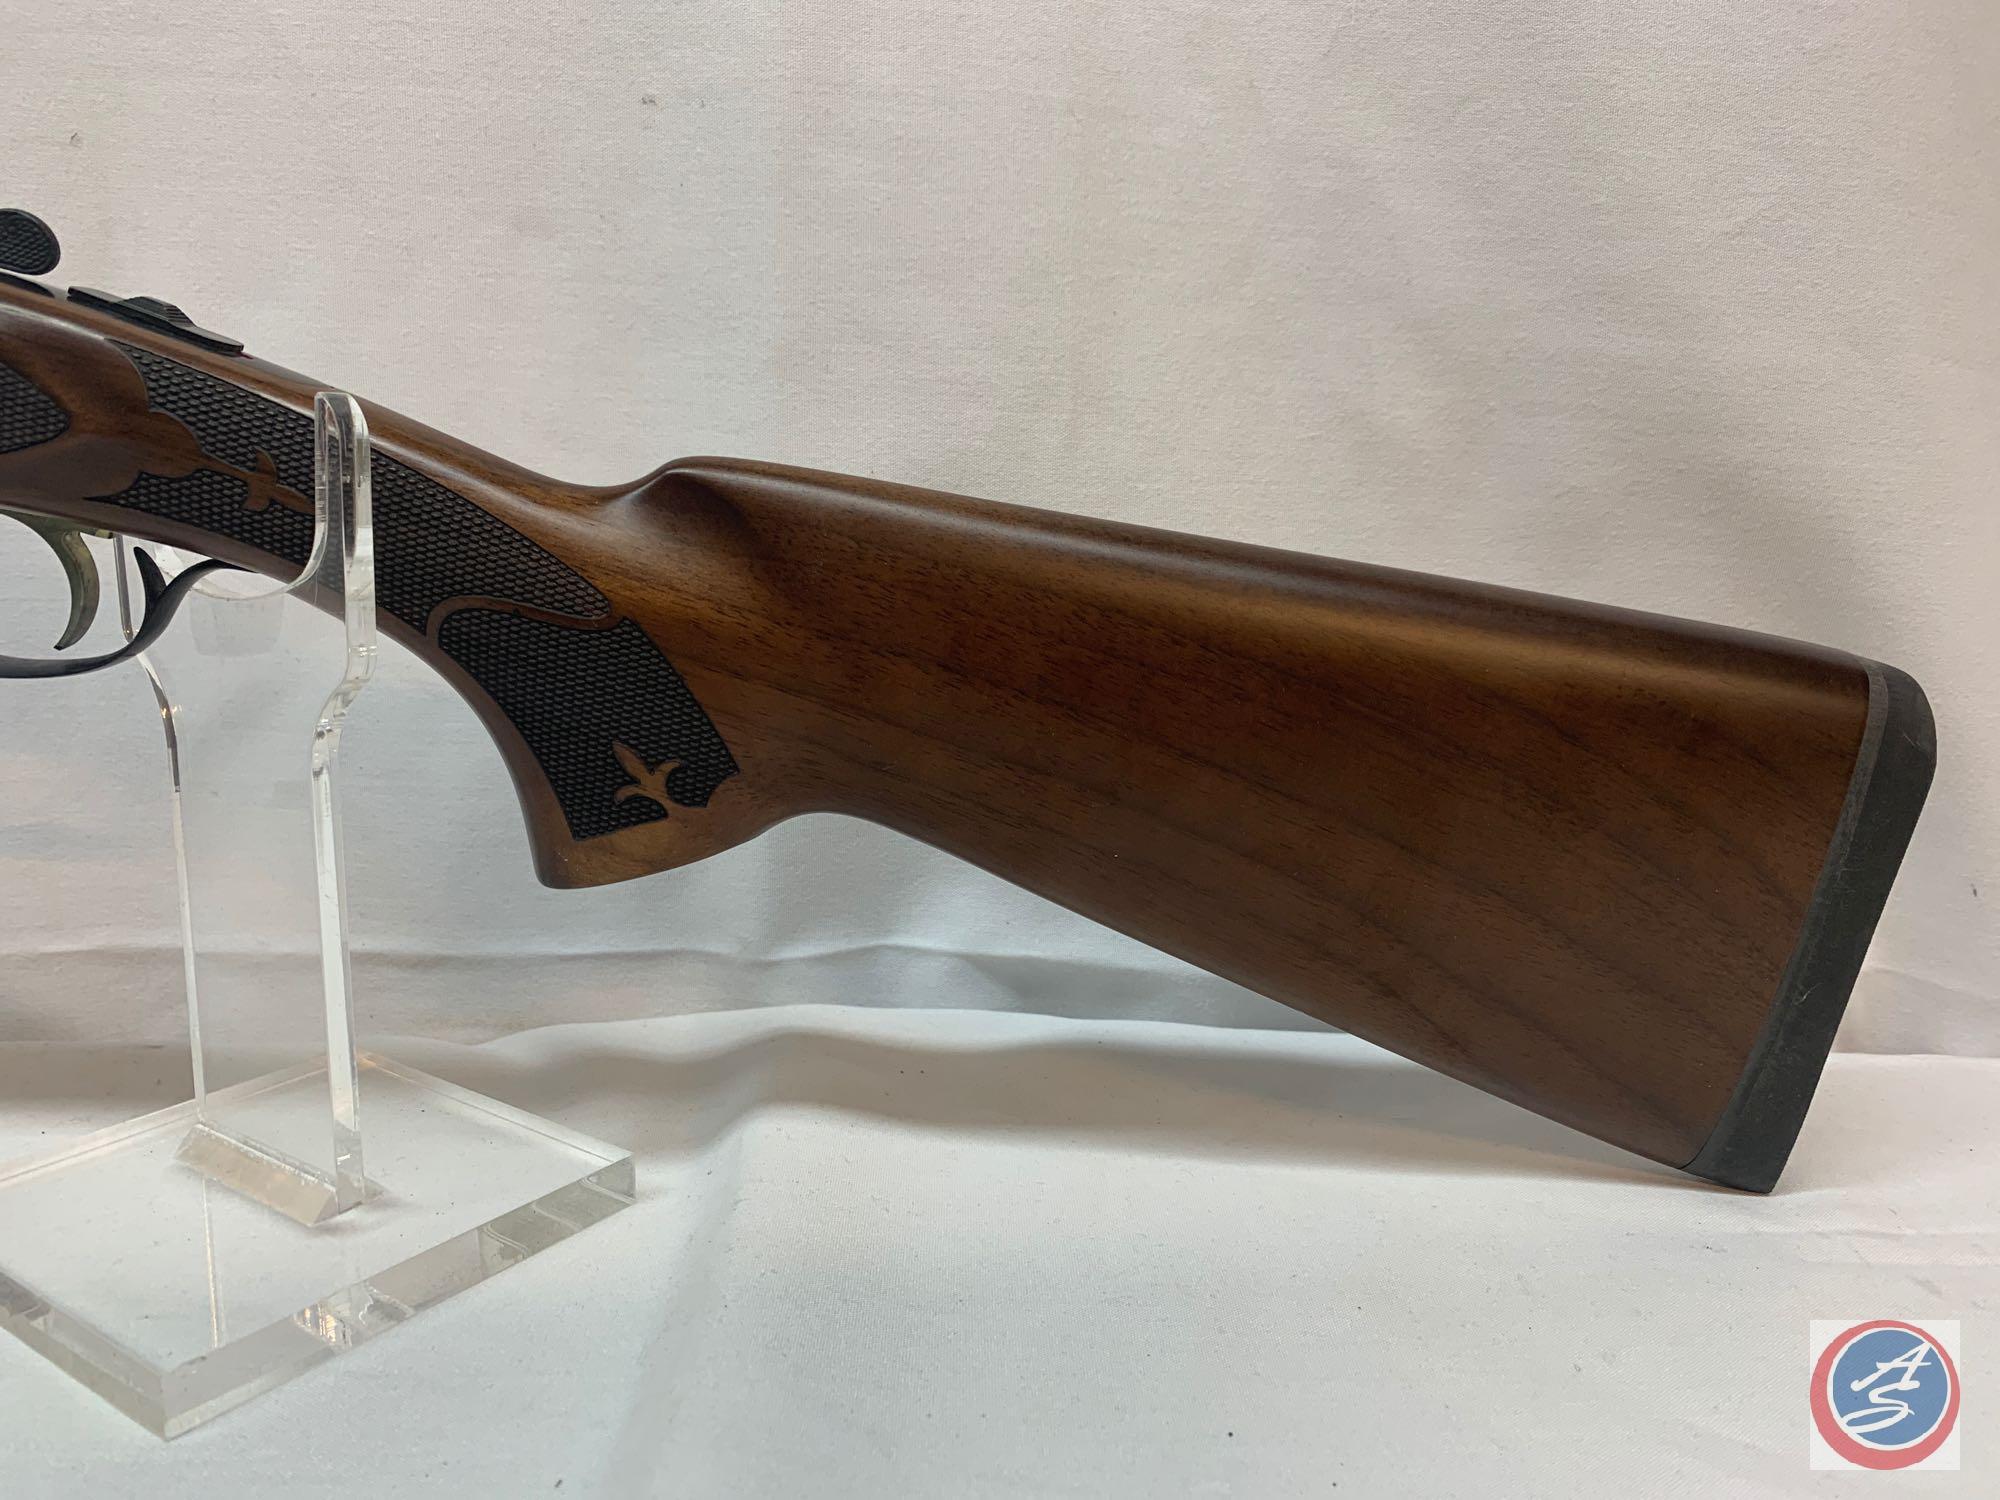 Stevens Model...512 Gold Wing 410 Shotgun As New Over/Under Shotgun with Gold inlaid pheasant, facto